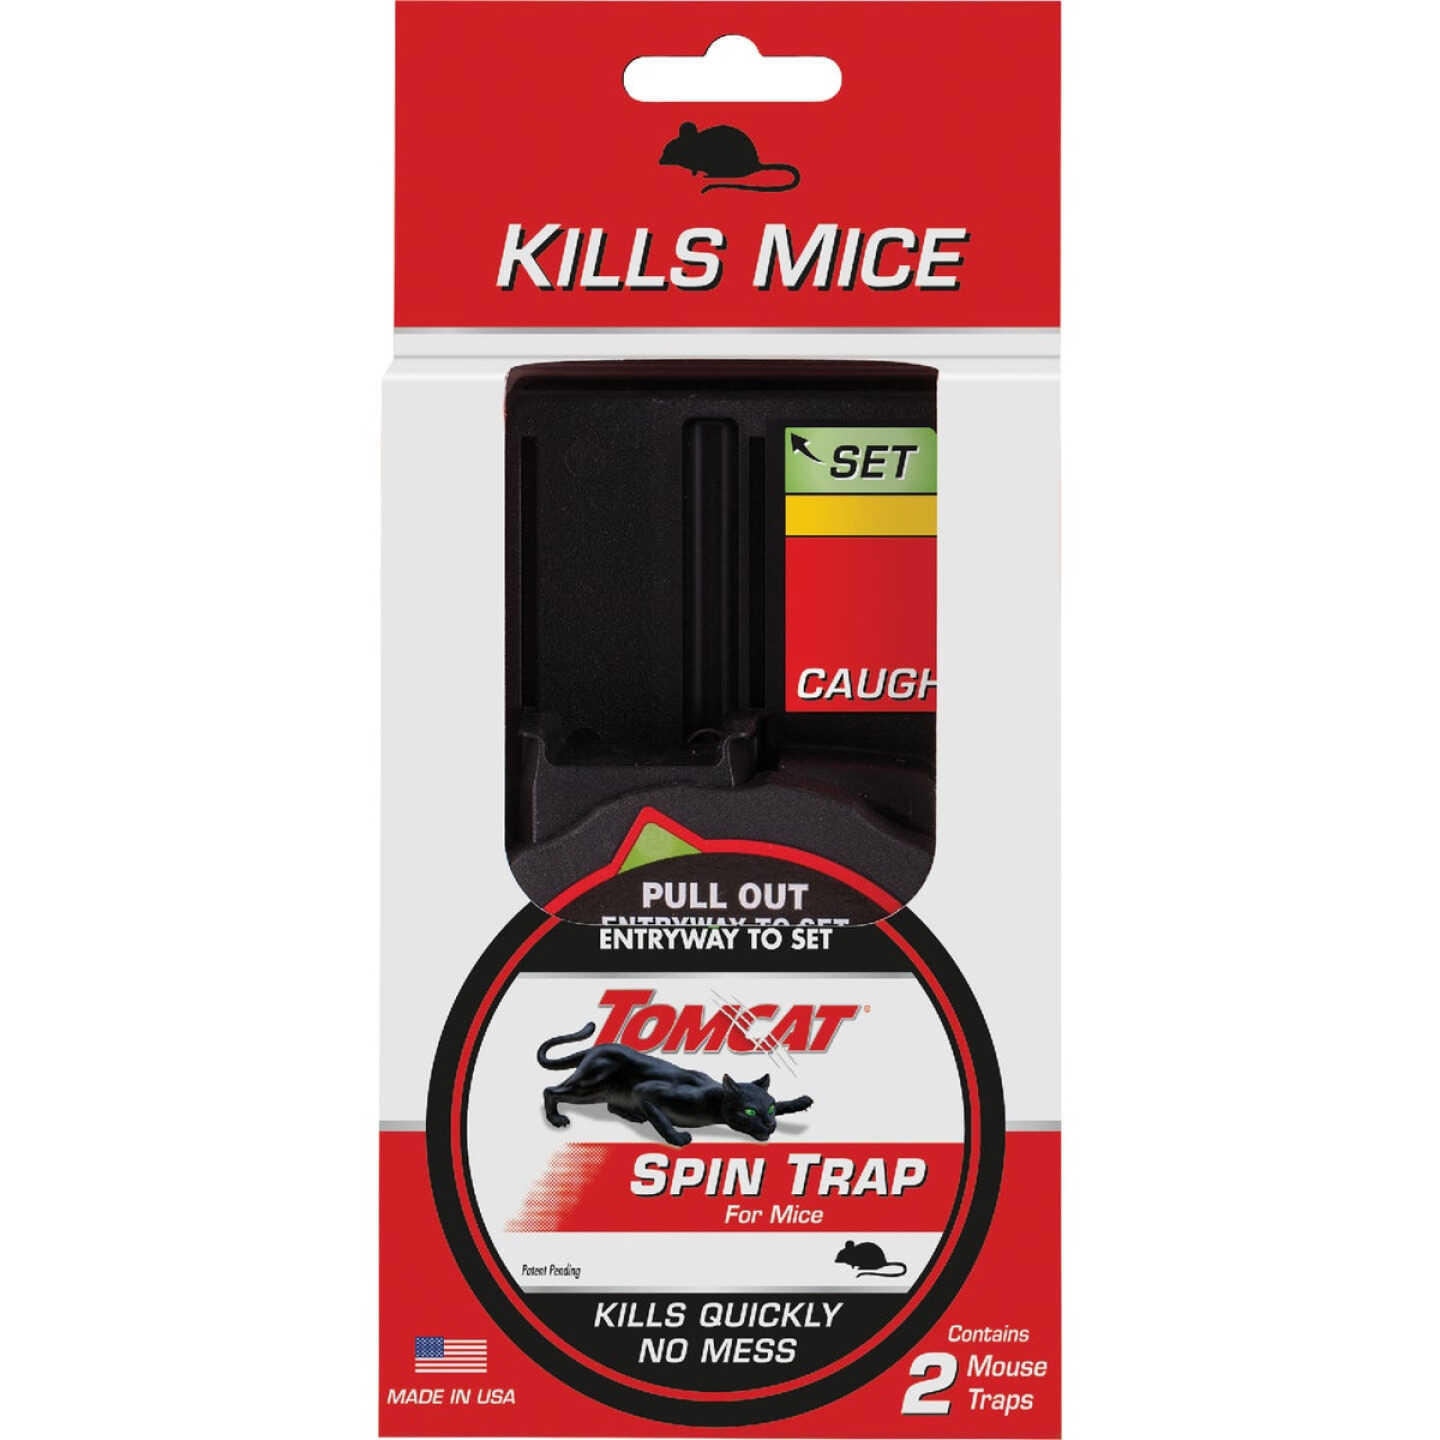 Tomcat Kill & Contain Mouse Trap, 2 count